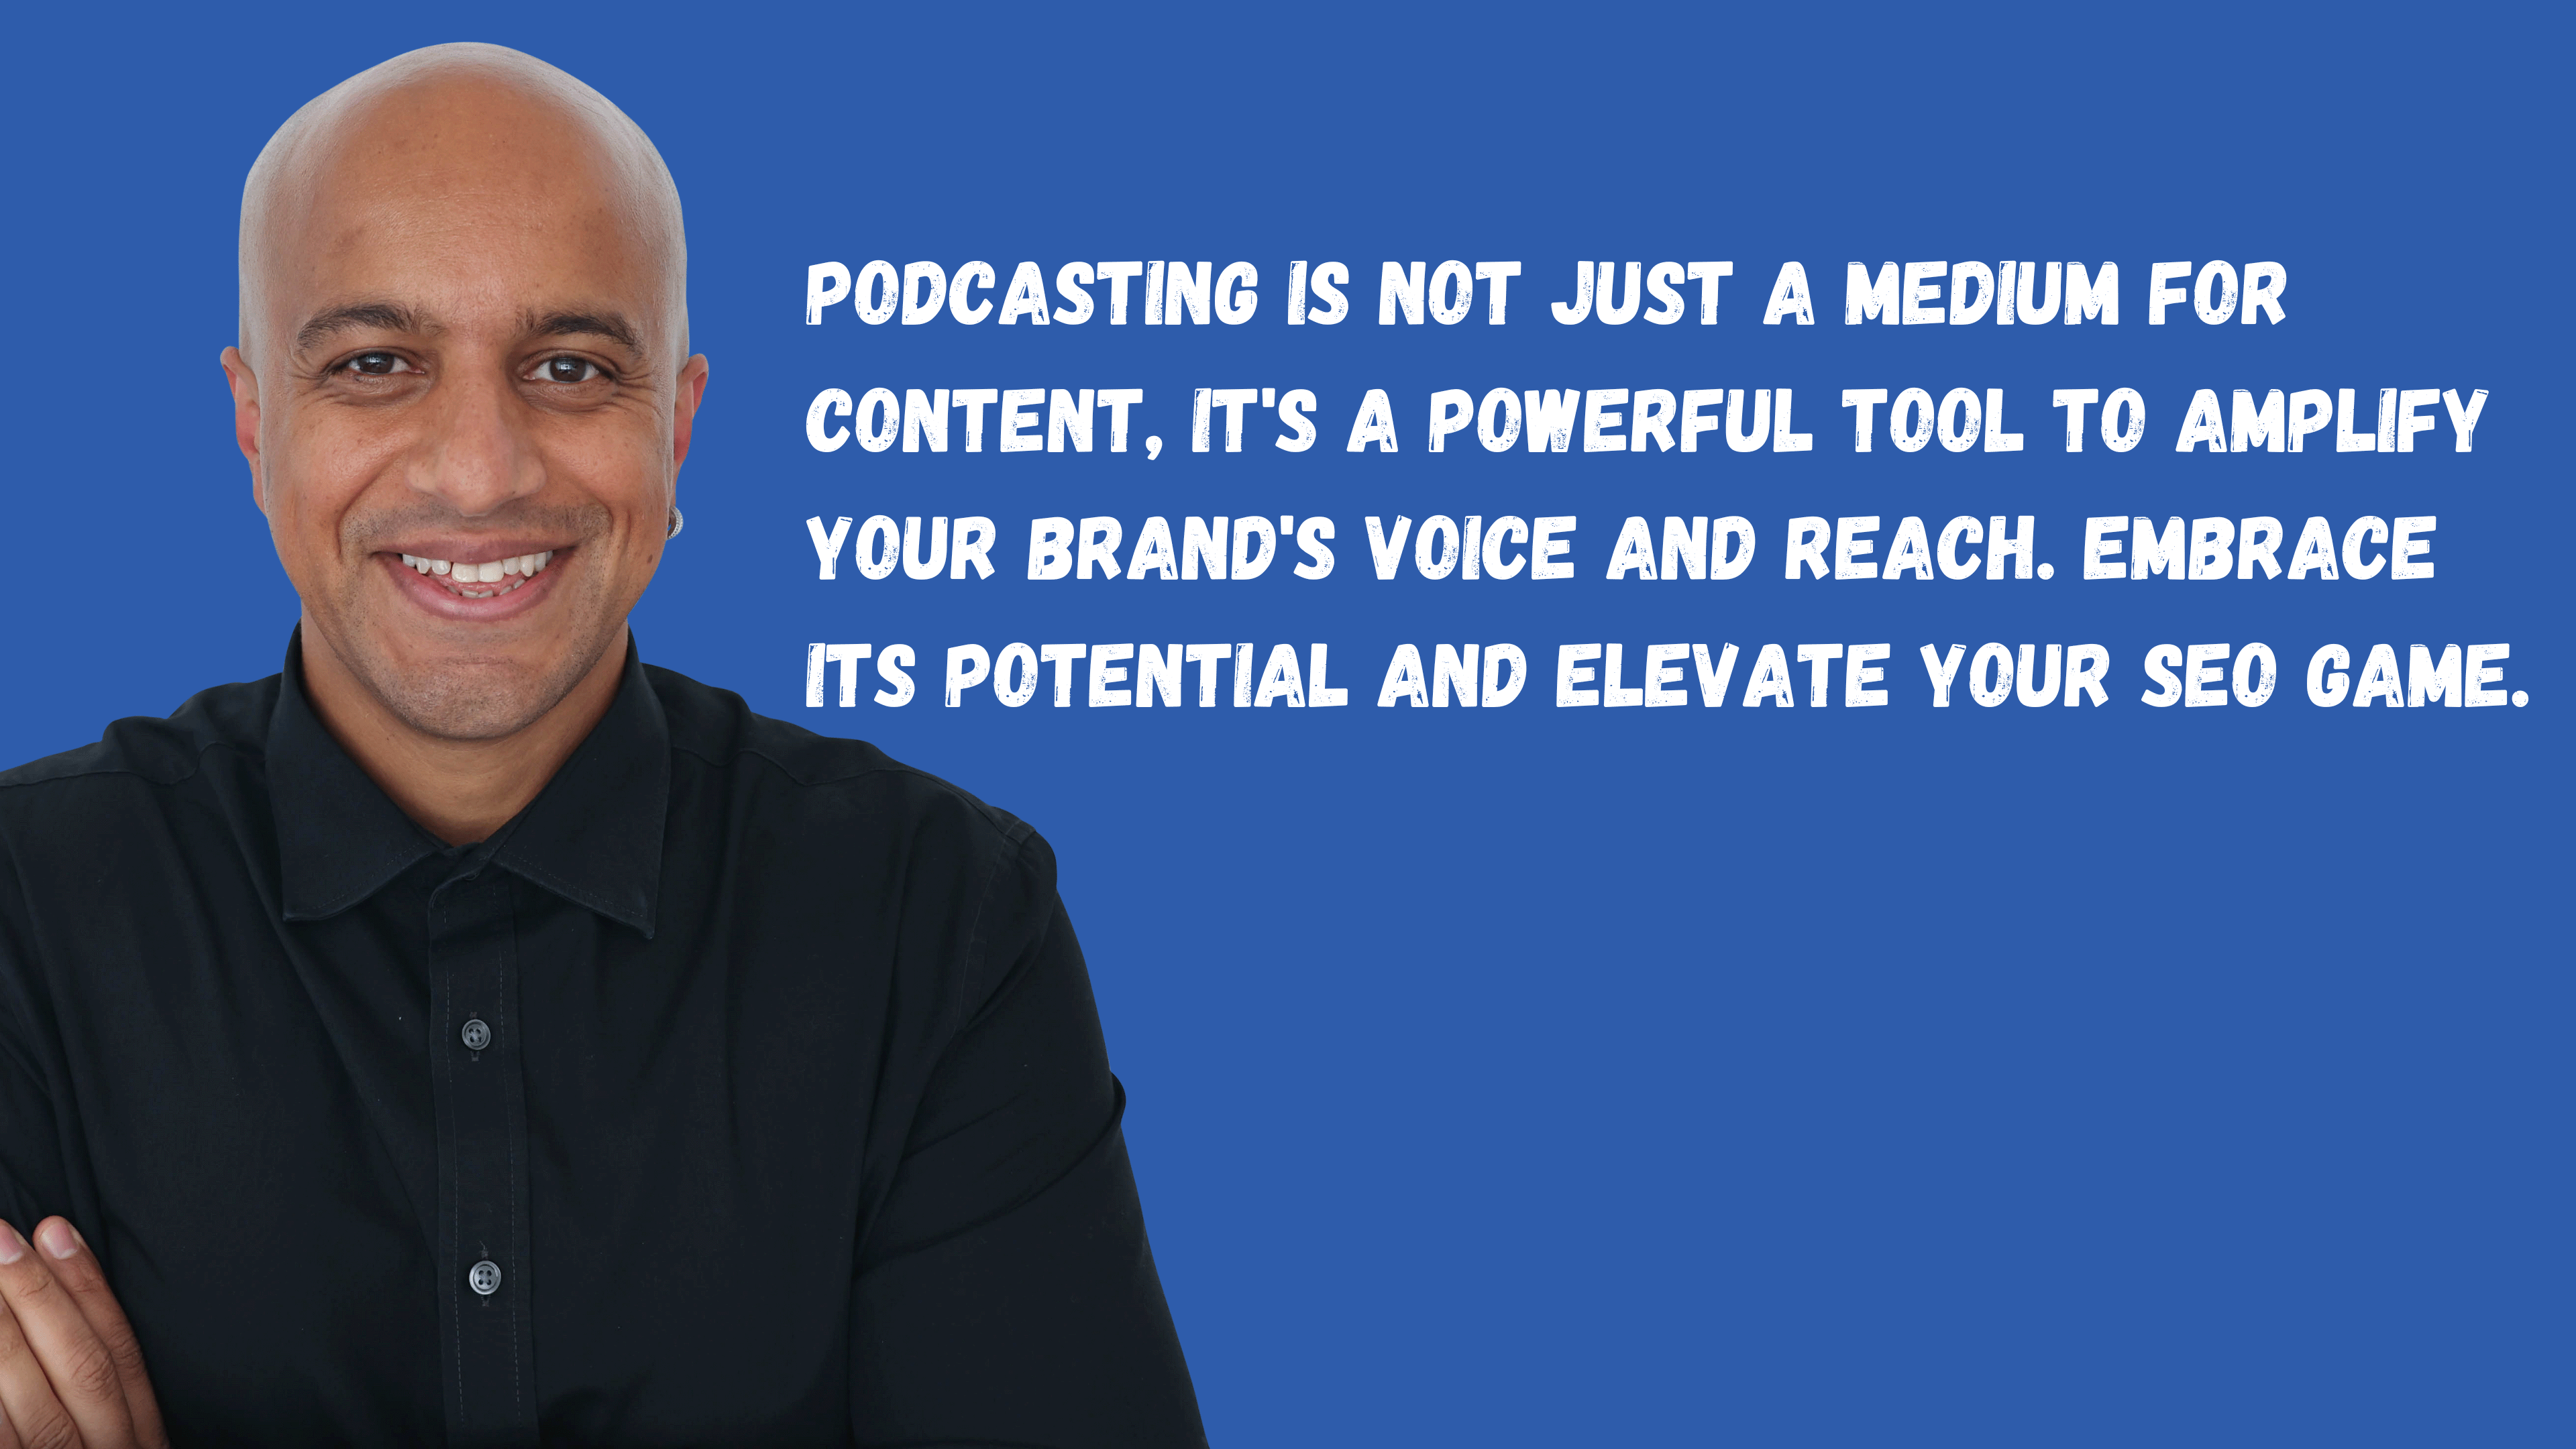 How to use podcasting as part of your SEO strategy